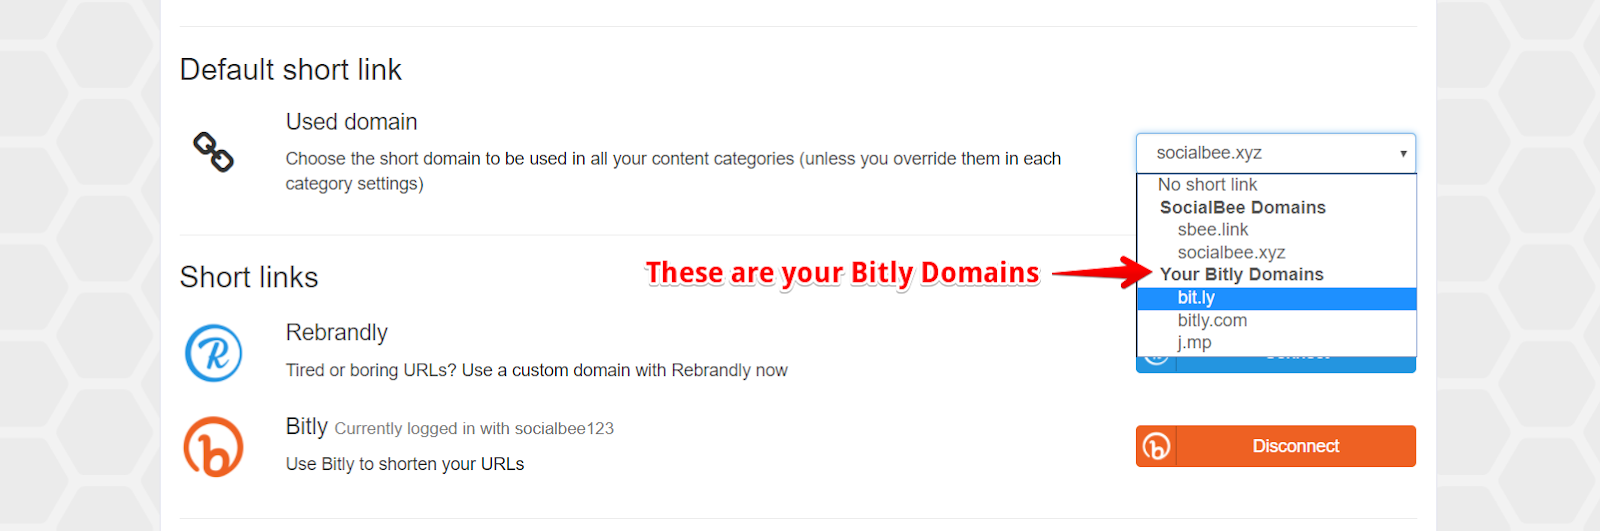 bitly_domains.png